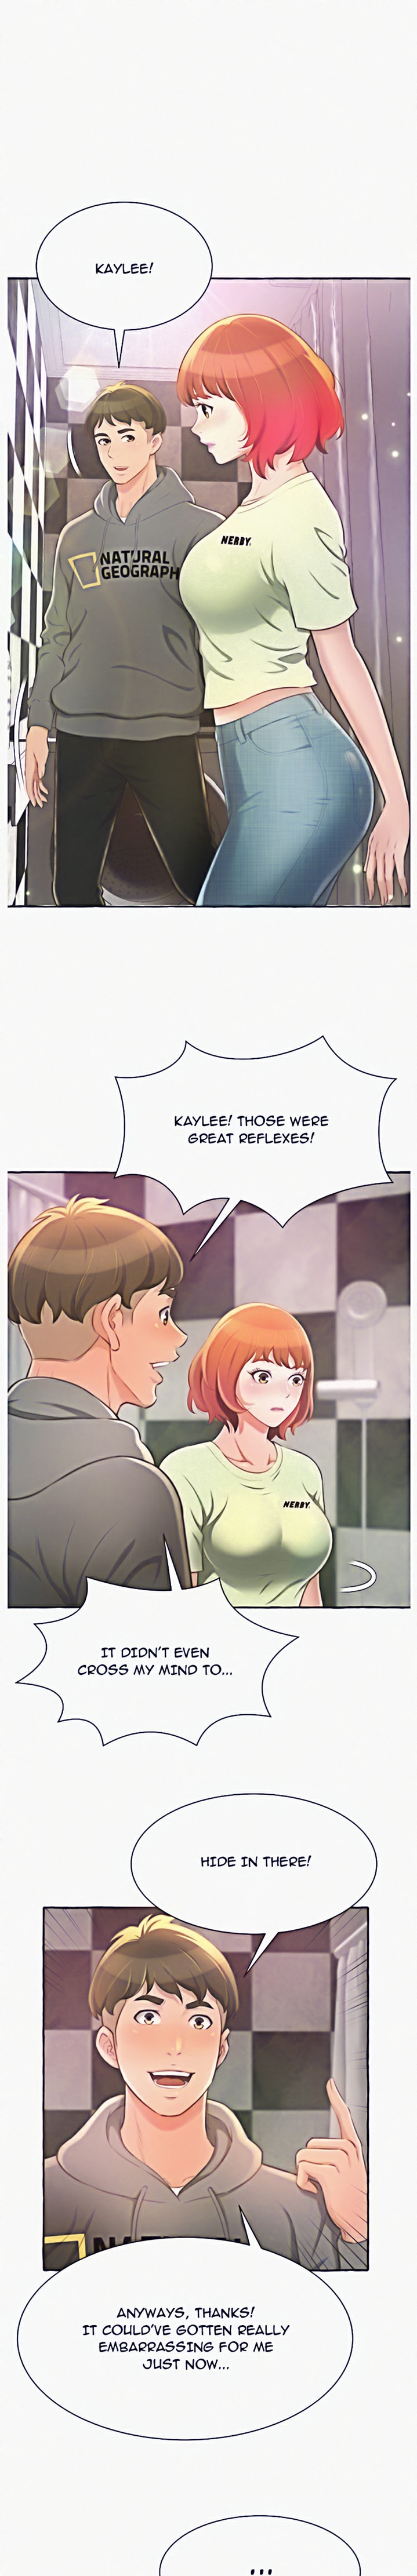 Can't Get to You - Chapter 2 Page 21